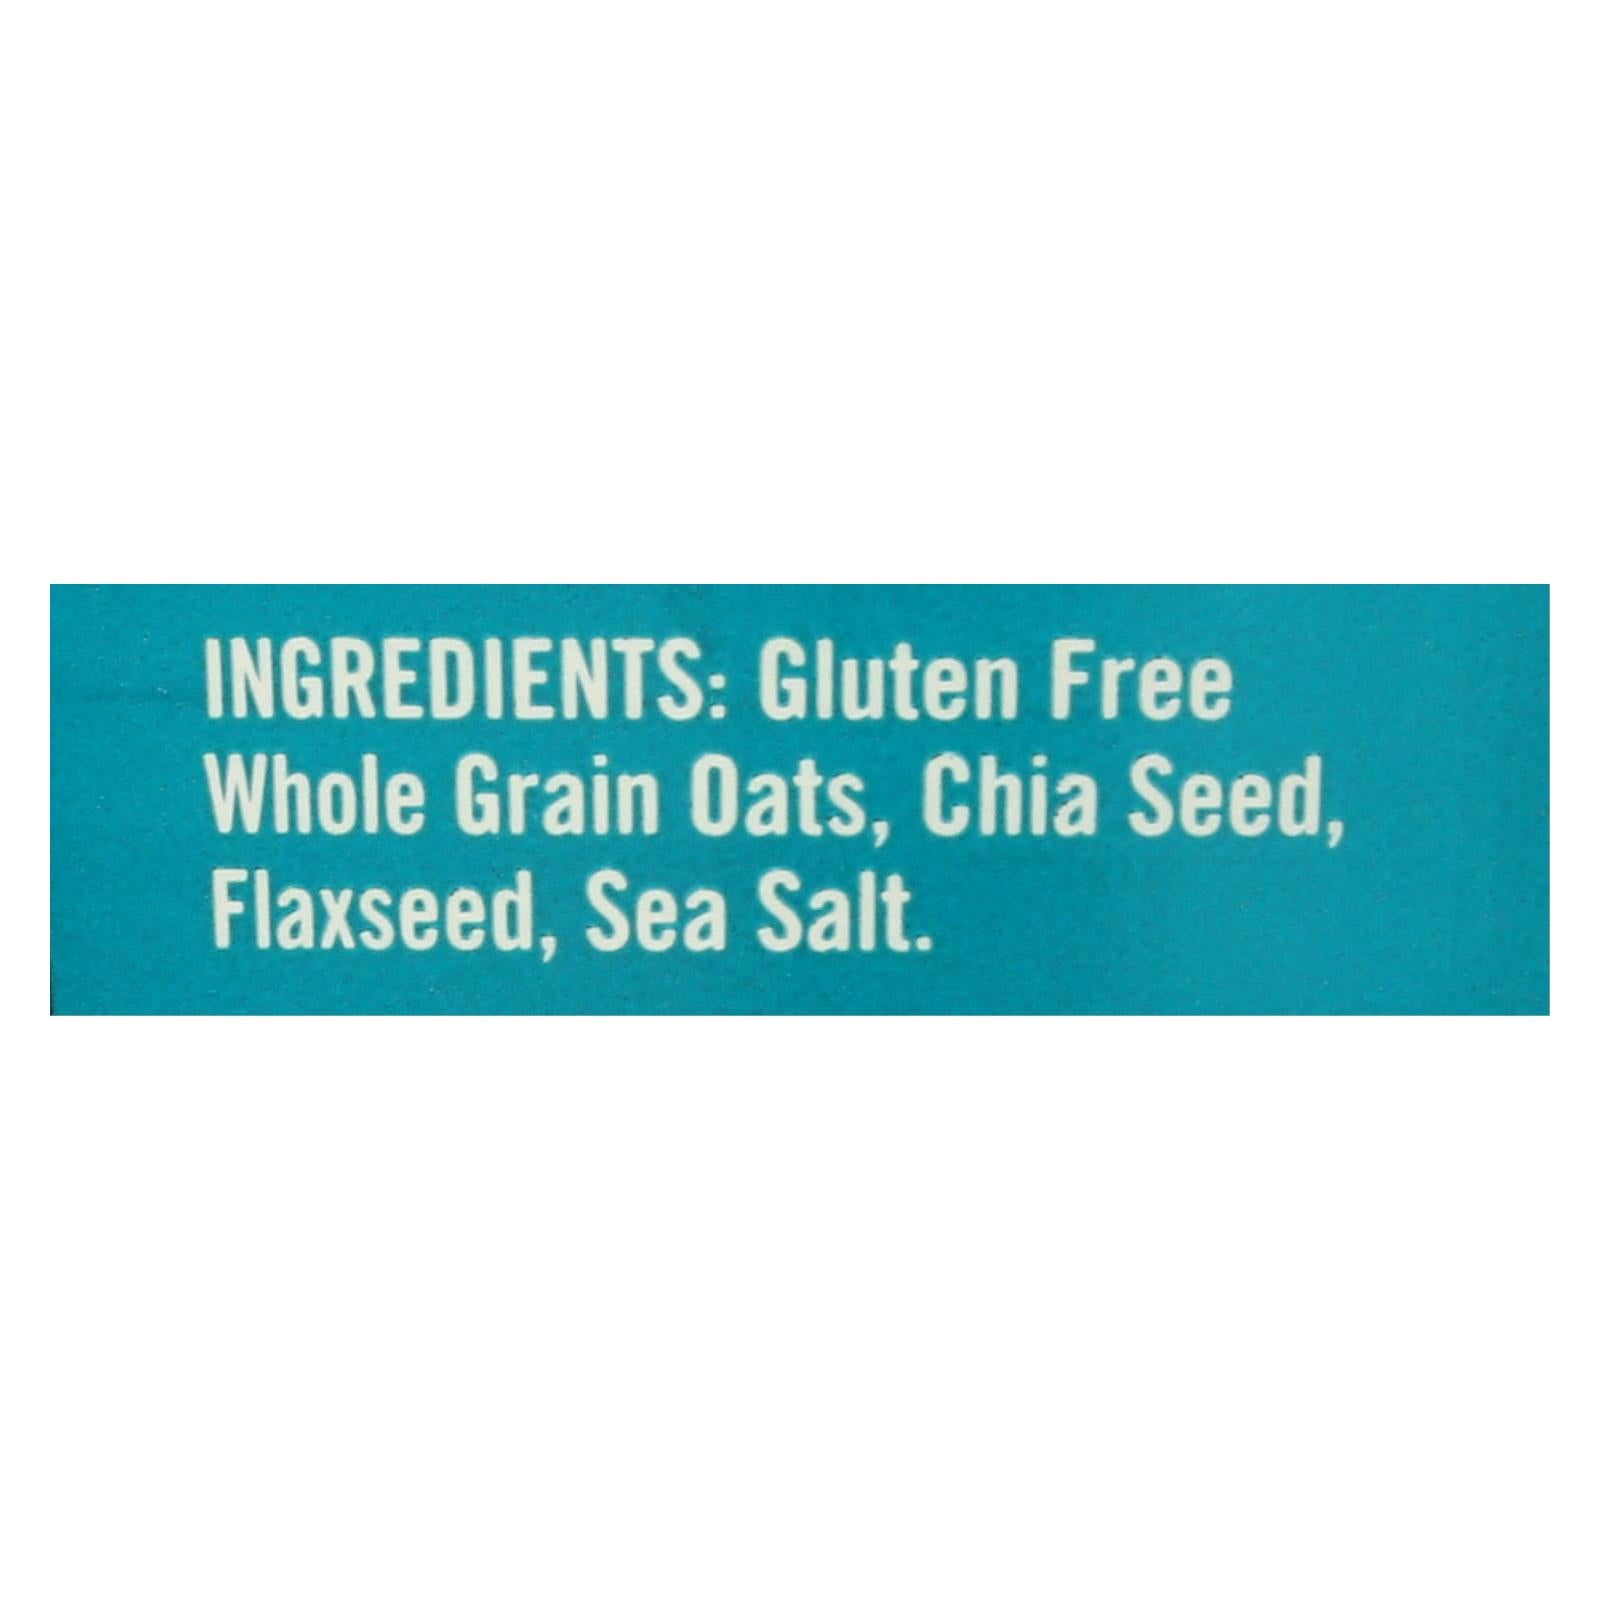 Bob's Red Mill - Gluten Free Oatmeal Cup Classic with Flax/Chia - 1.81 oz - Case of 12